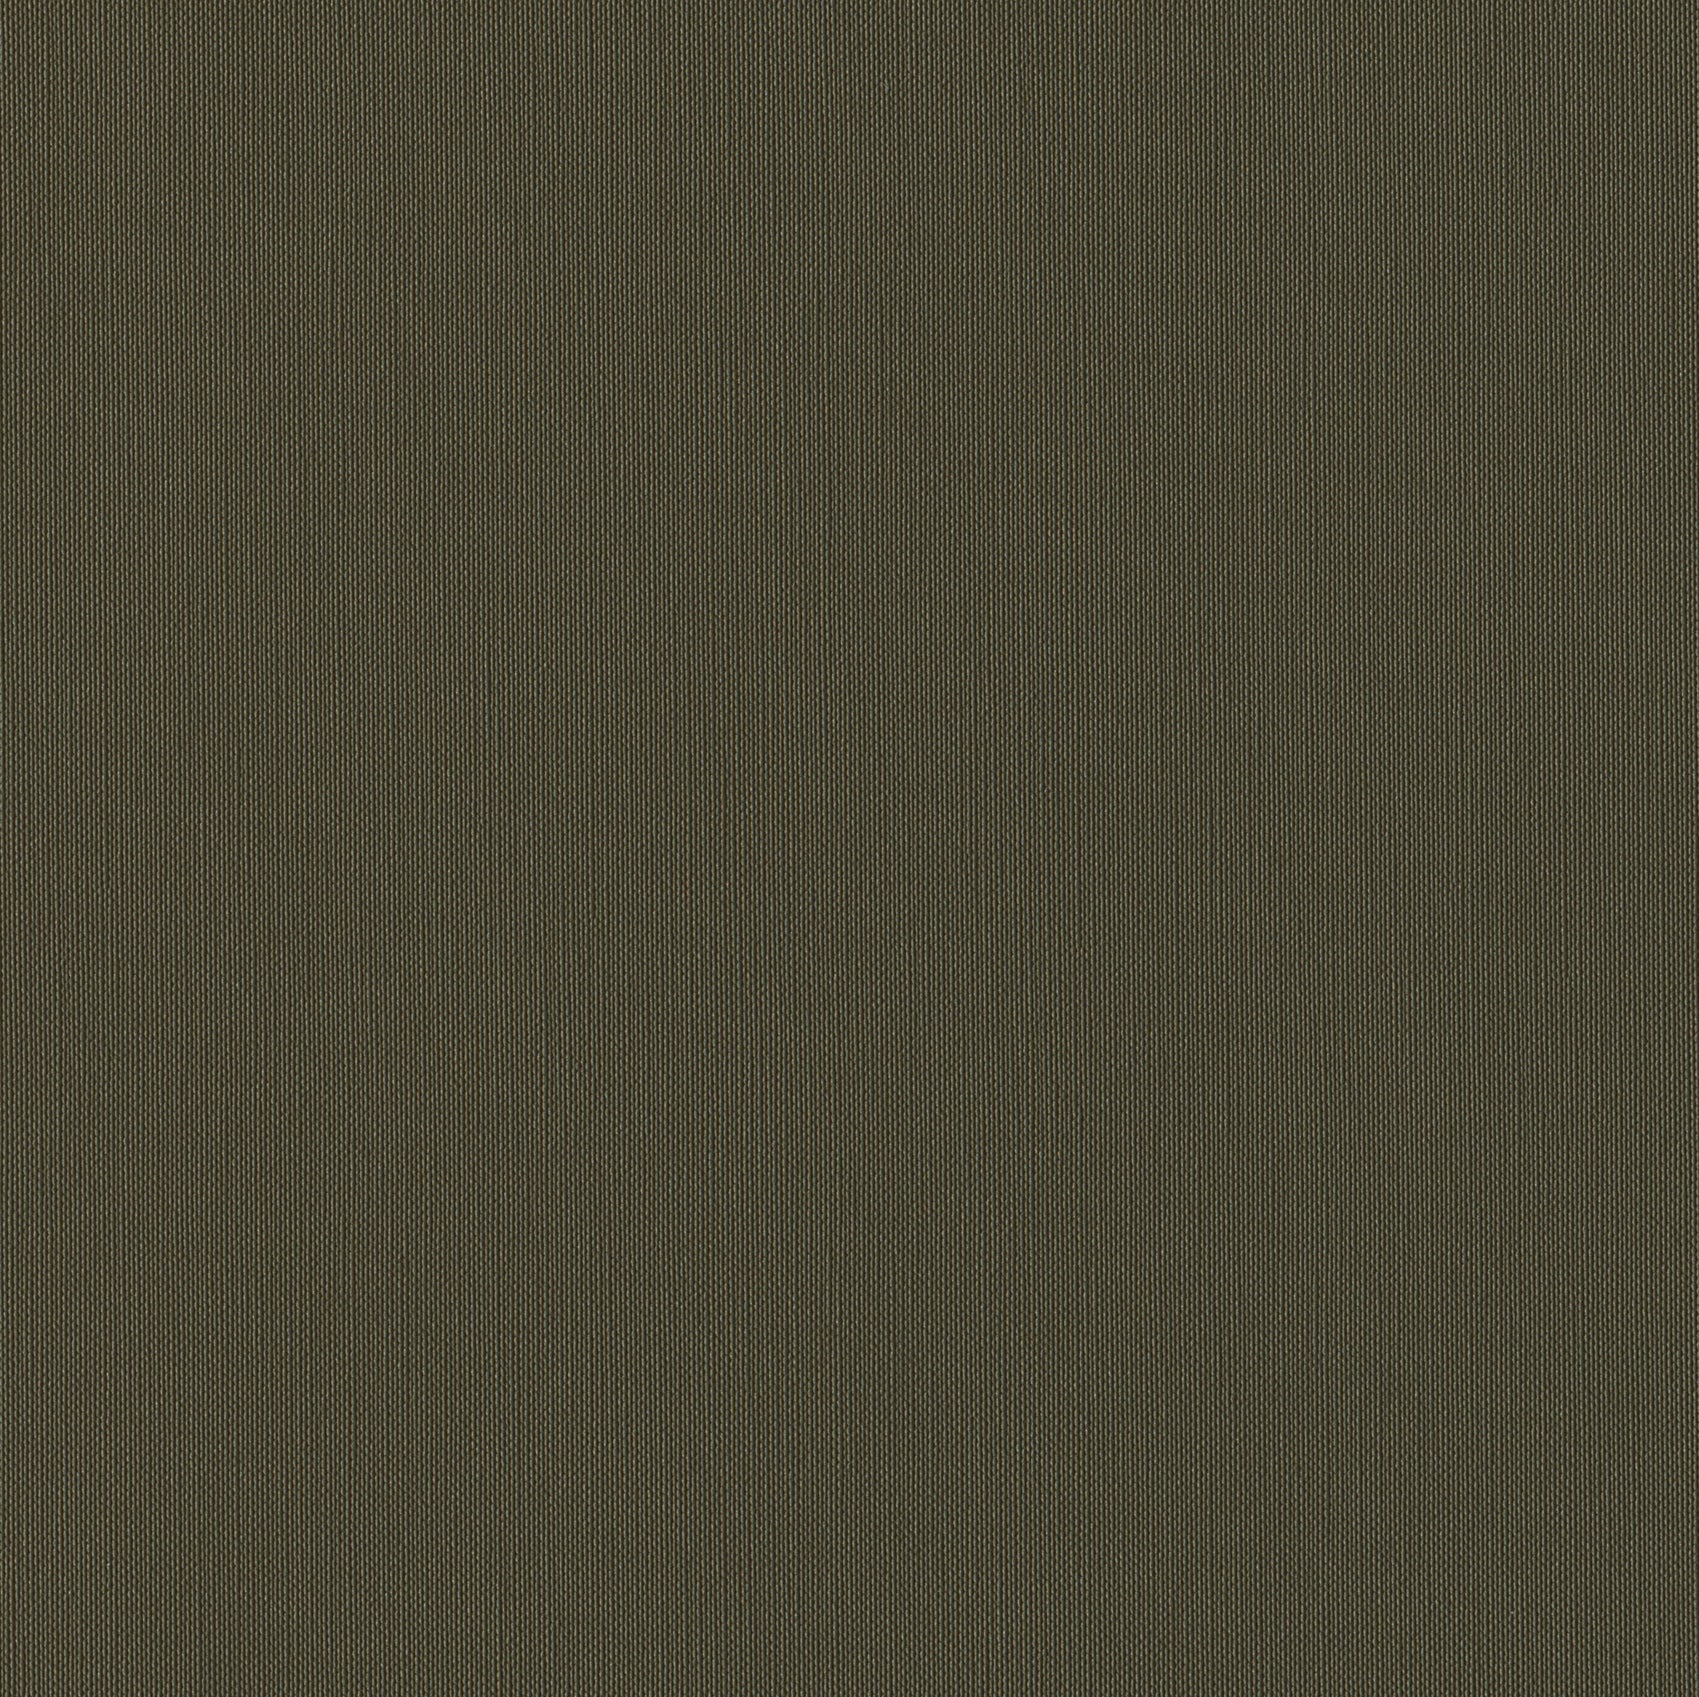    Andriali-Contract-Vinyl_Upholstery-Design-LegendFR-FR5-Color-430Olive-Width-140cm